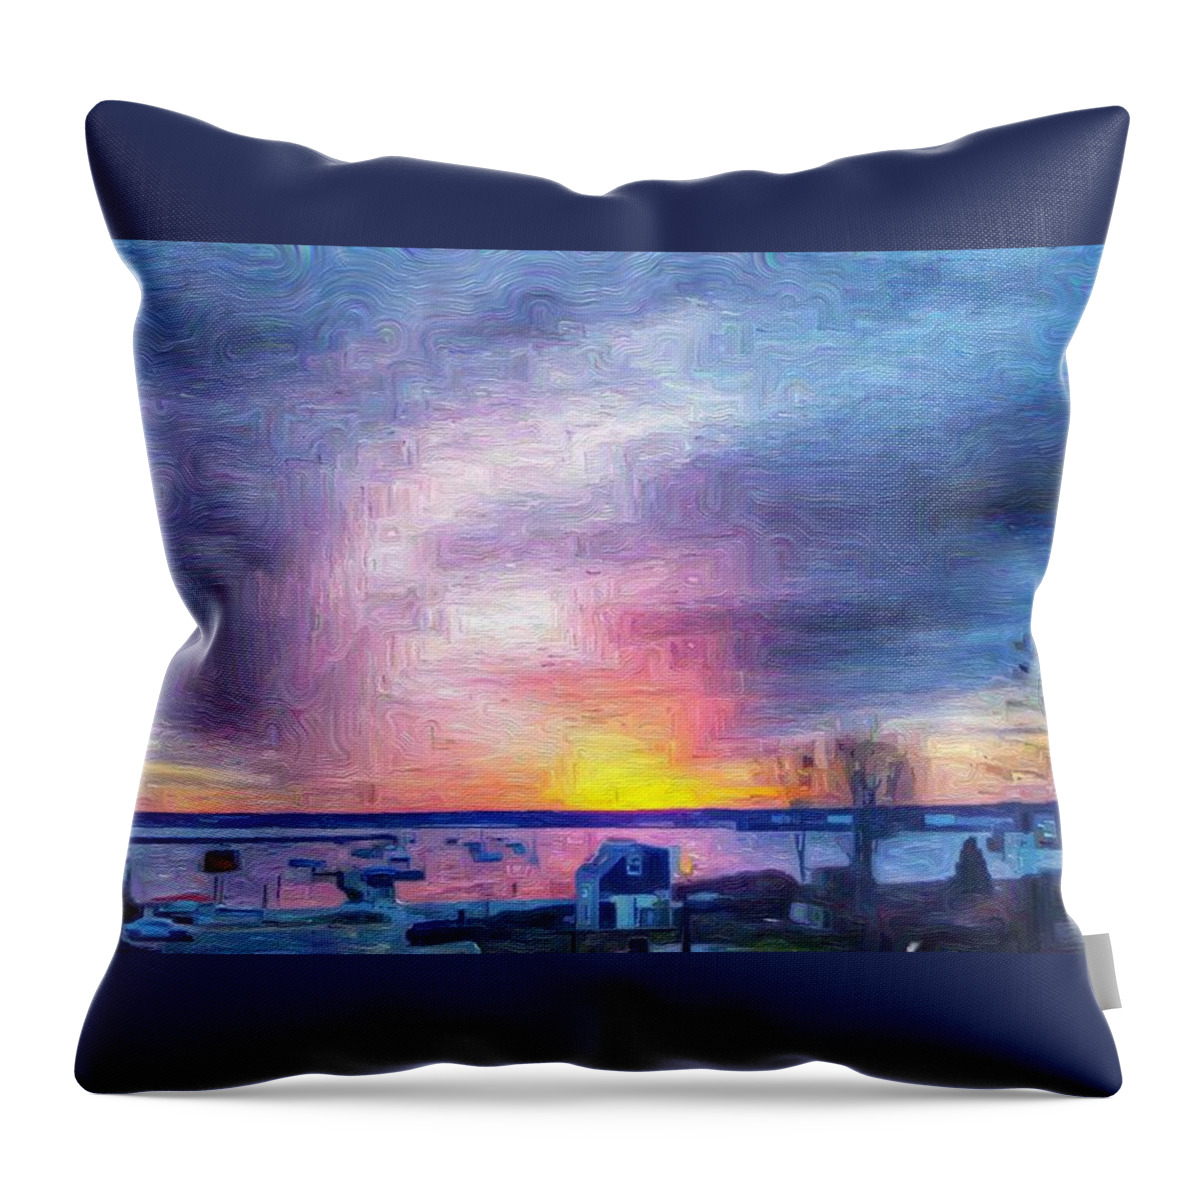 Vineyard Haven Throw Pillow featuring the photograph New Dawn Vineyard Haven by Jeffrey Canha